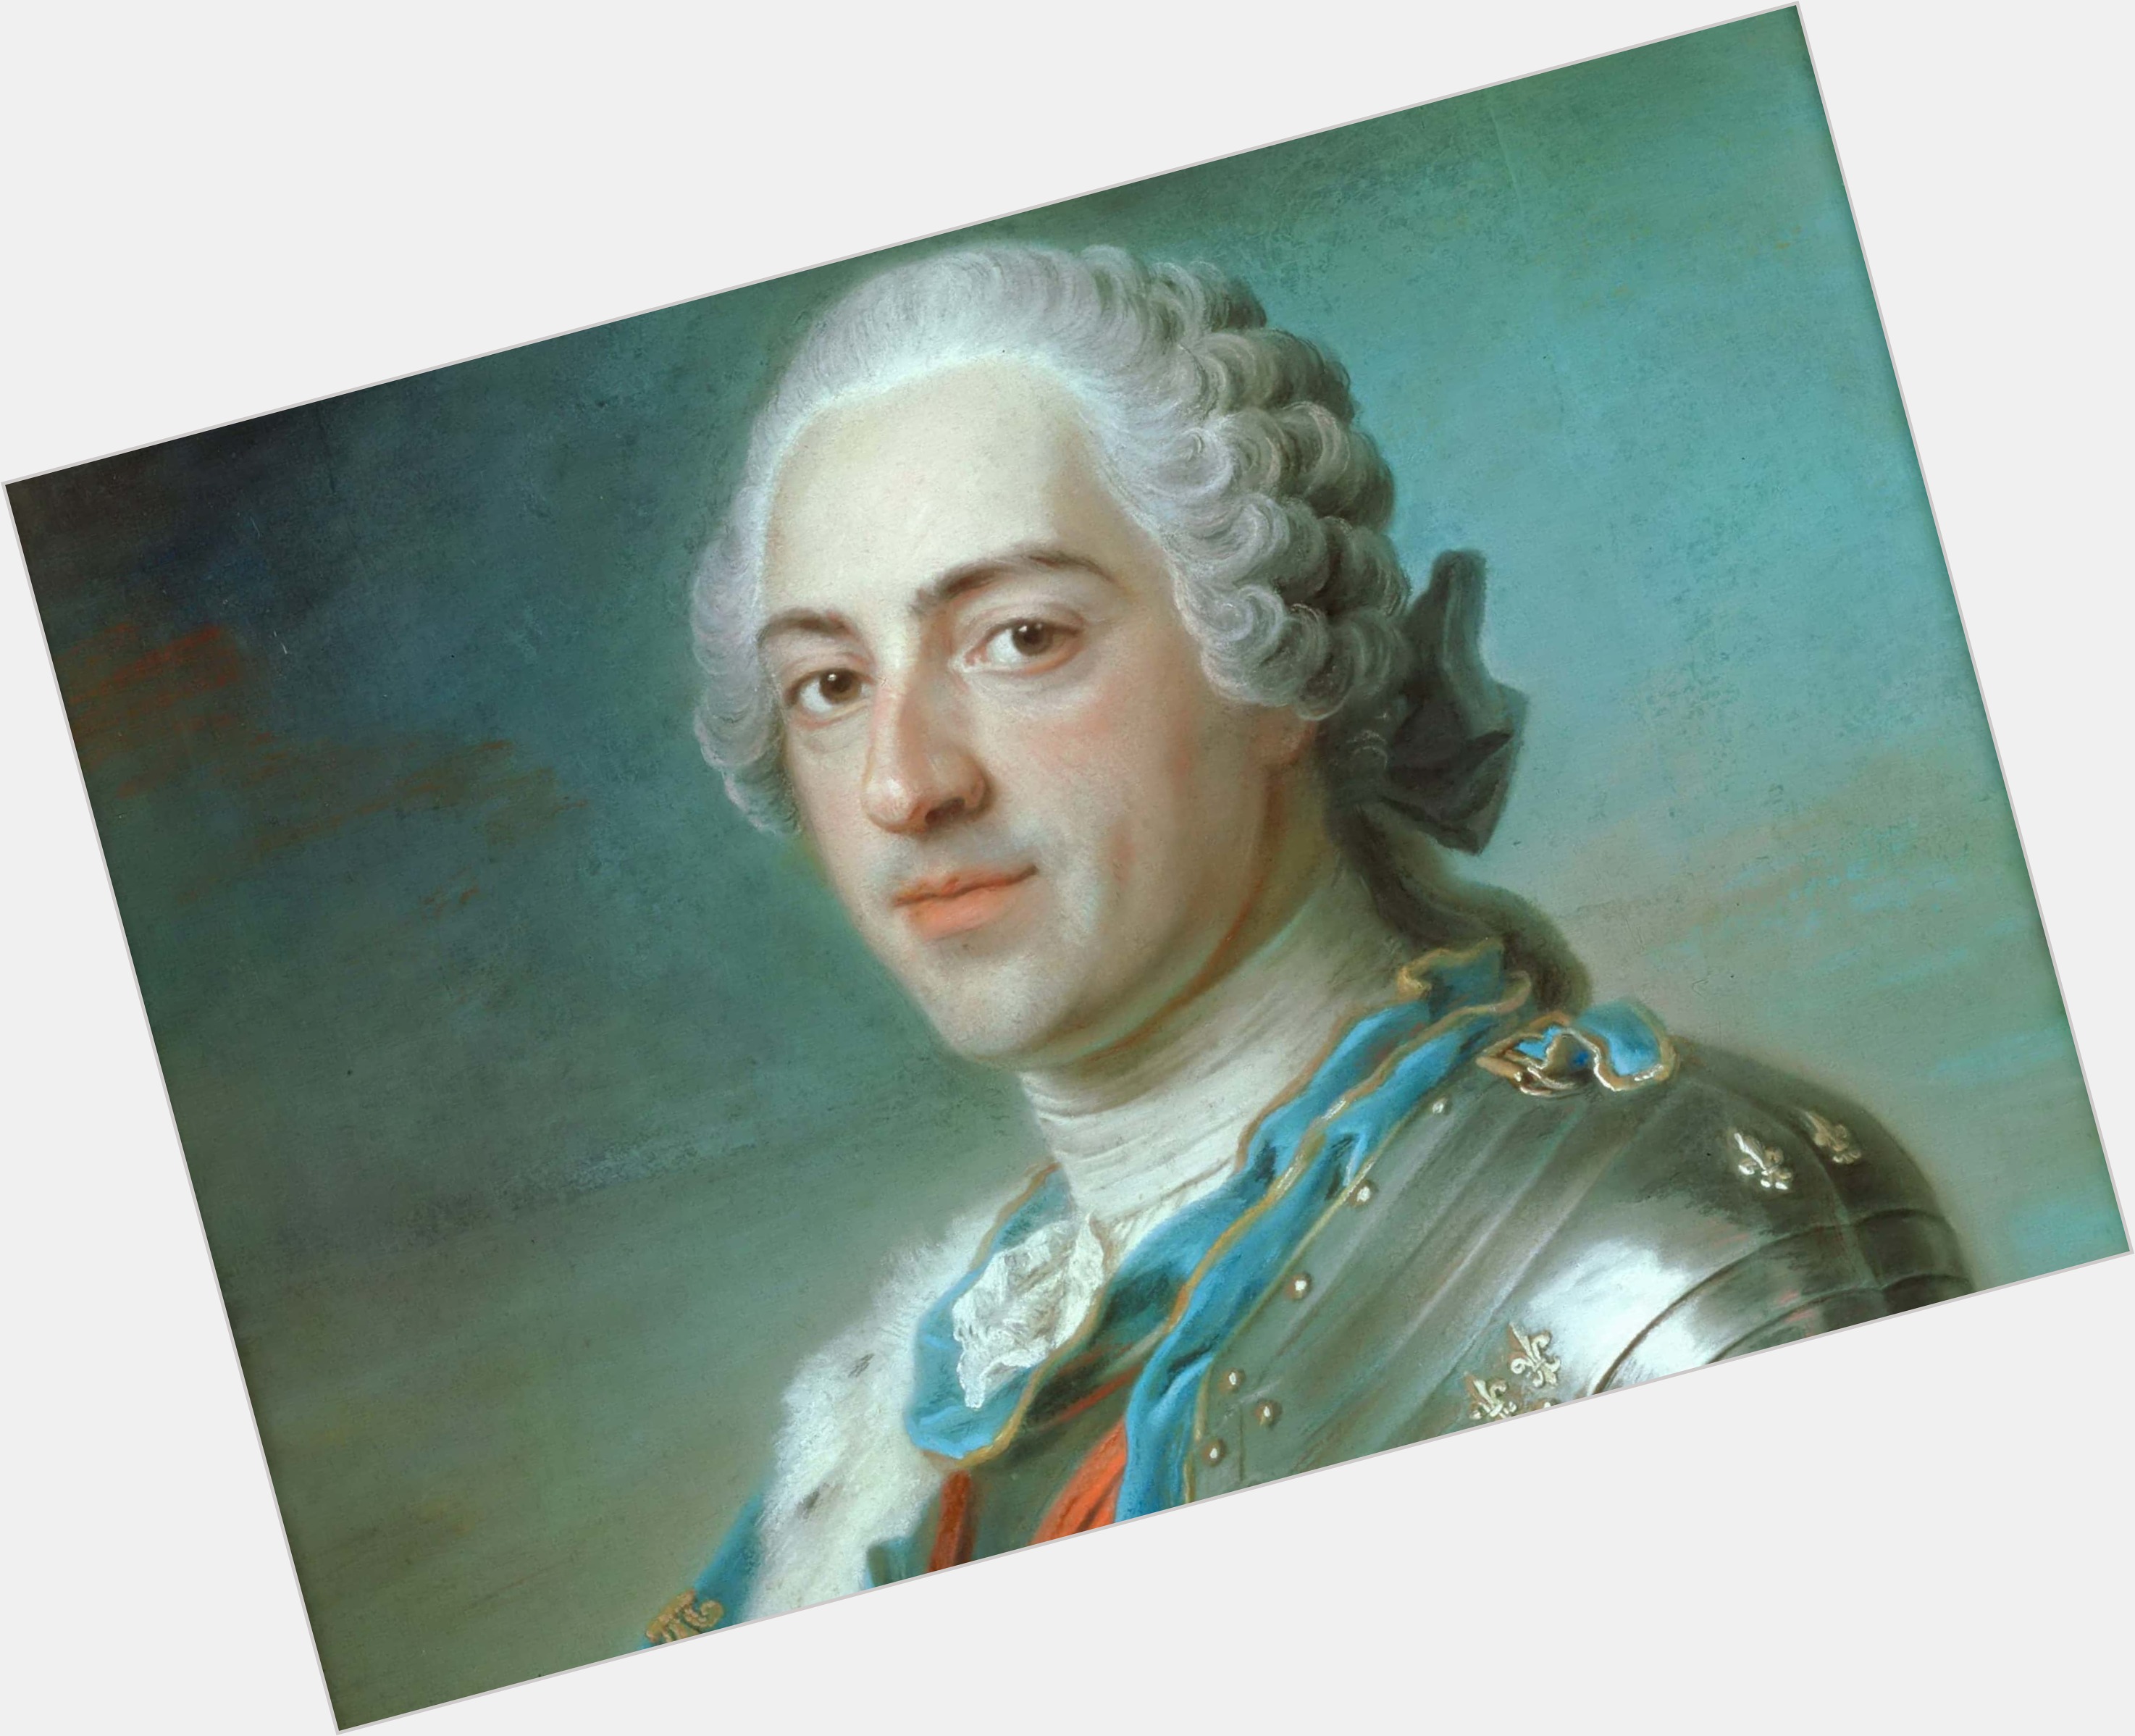 <a href="/hot-men/louis-xv-of-france/where-dating-news-photos">Louis Xv Of France</a>  